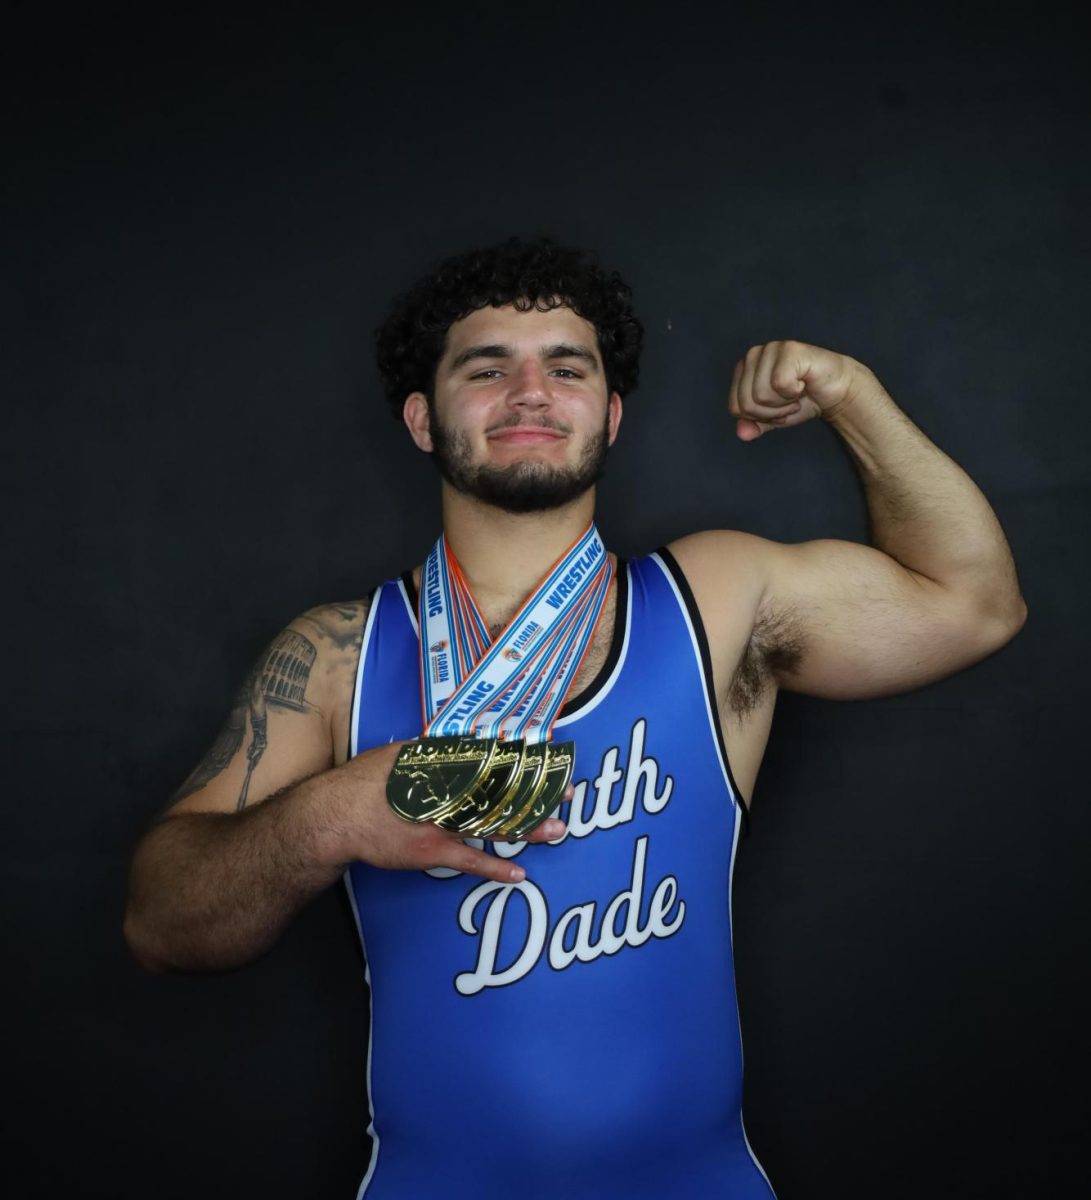 Senior Sawyer Bartelt, 4x state champion, with his state championship medals.